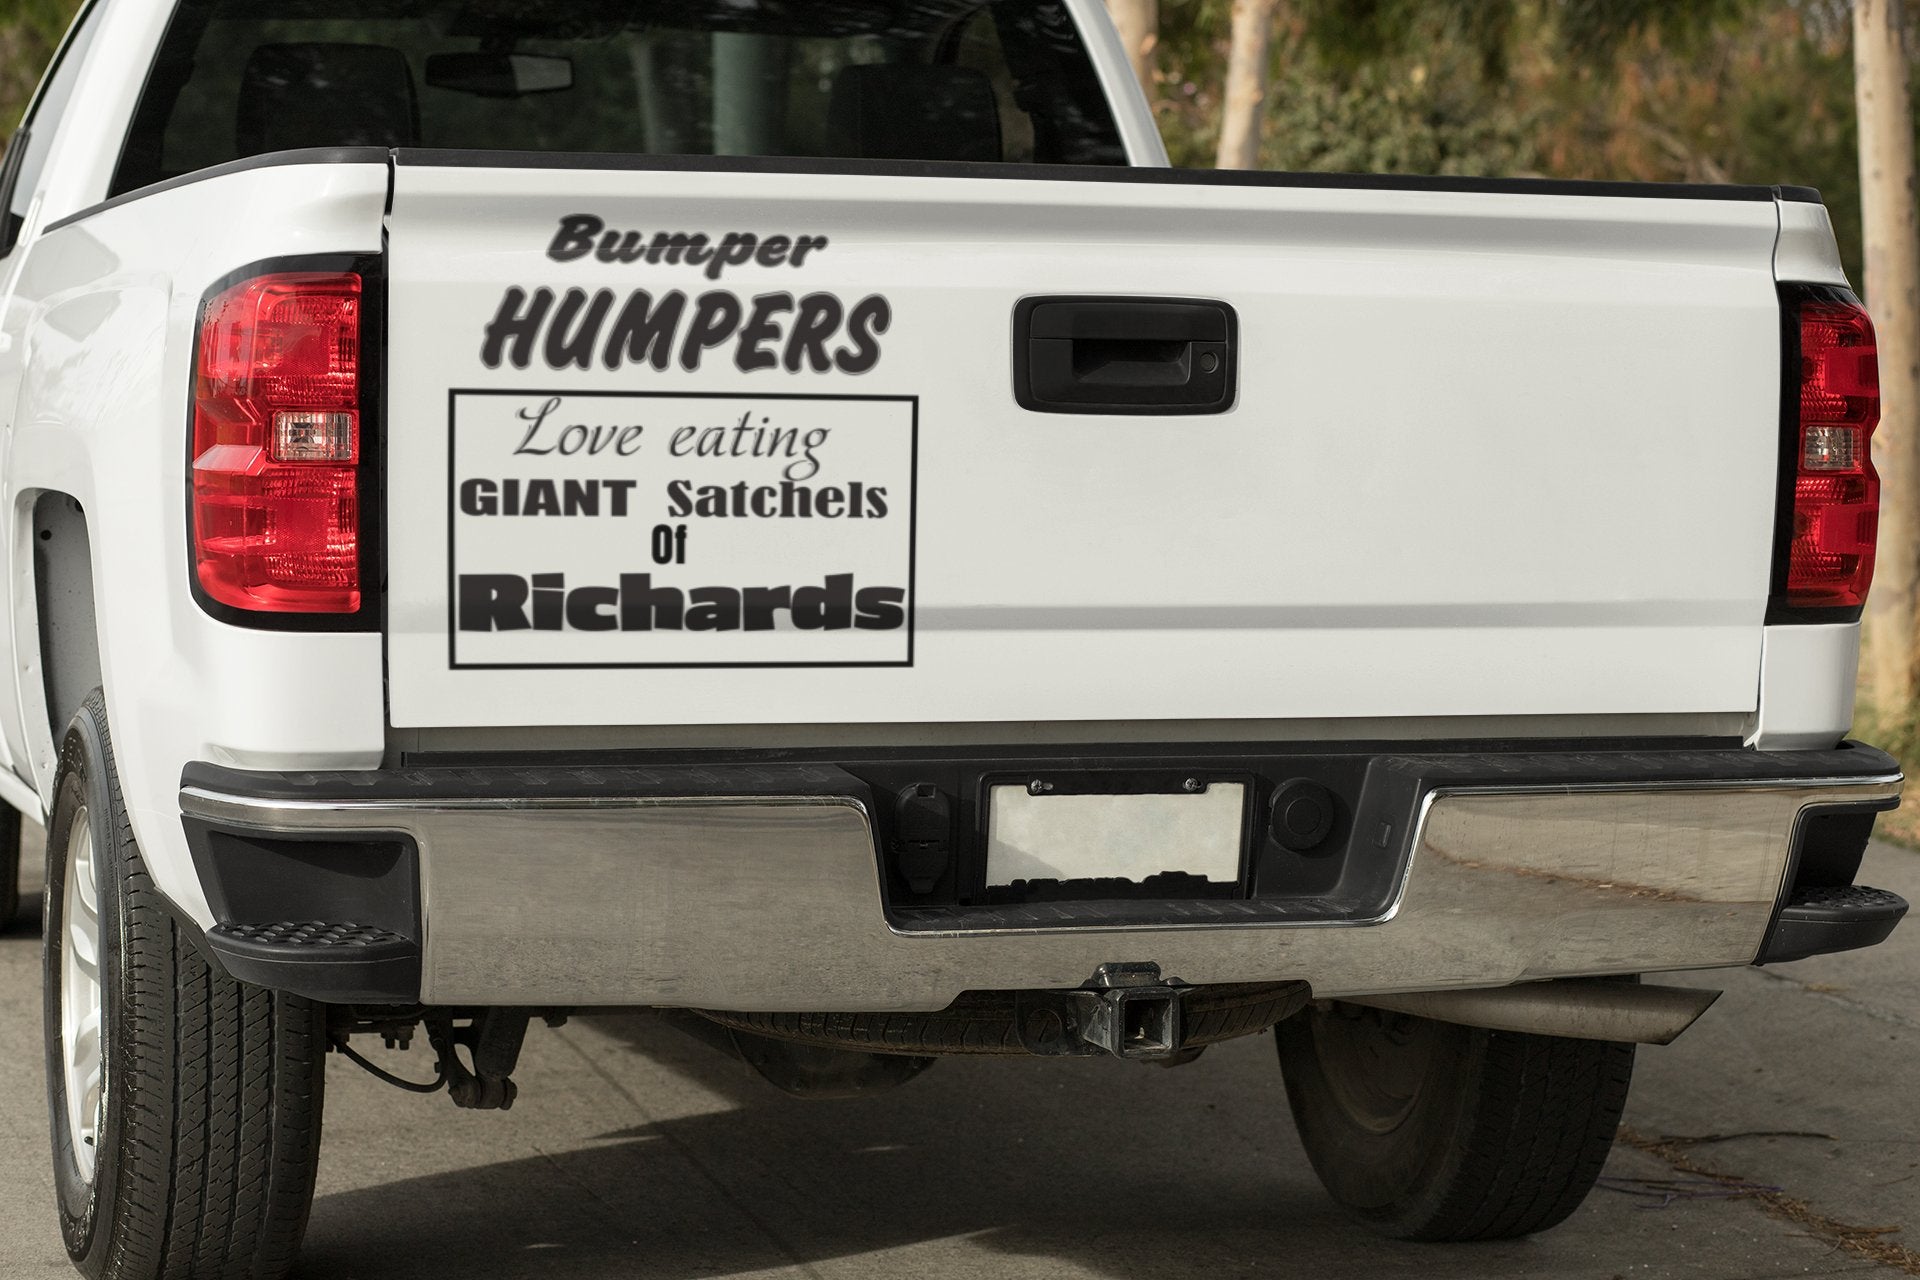 Bumper Humpers love eating giant satchels of Richards Vinyl Decal boss gift car decor dads day gift gift for dad gift for grandpa gift for her gift for him gift for husband gift for mom gift for sister gift for wife moms gift Unique gift Vinyl Vinyl decals vinyl sticker Vinyl stickers window decal window sticker